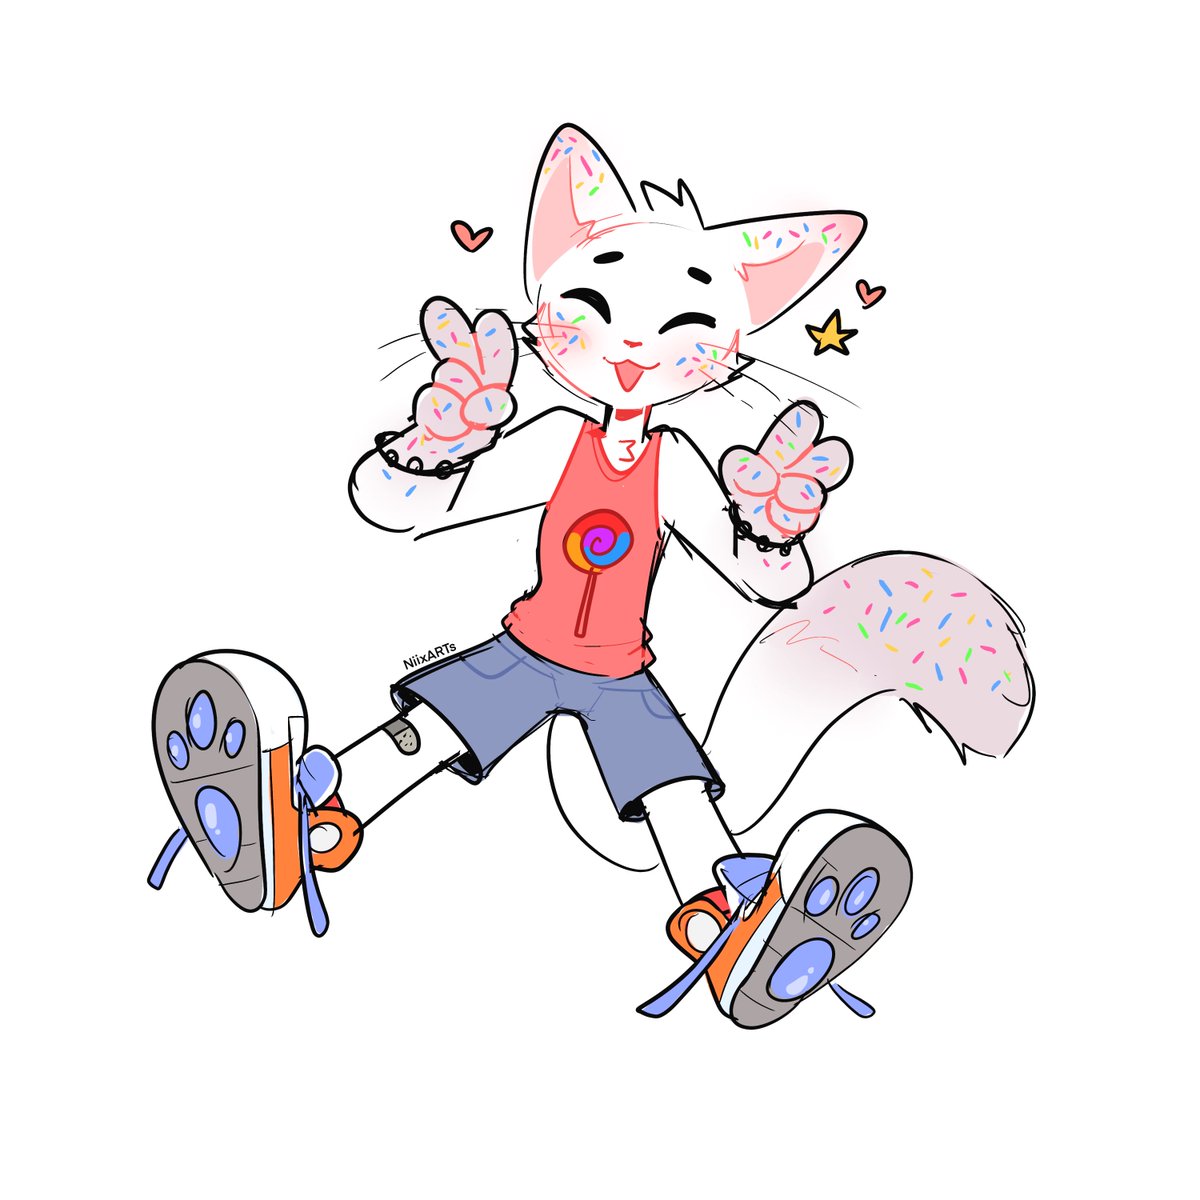 「Sprinkle cat! Work for  」|NiixARTs🐇のイラスト